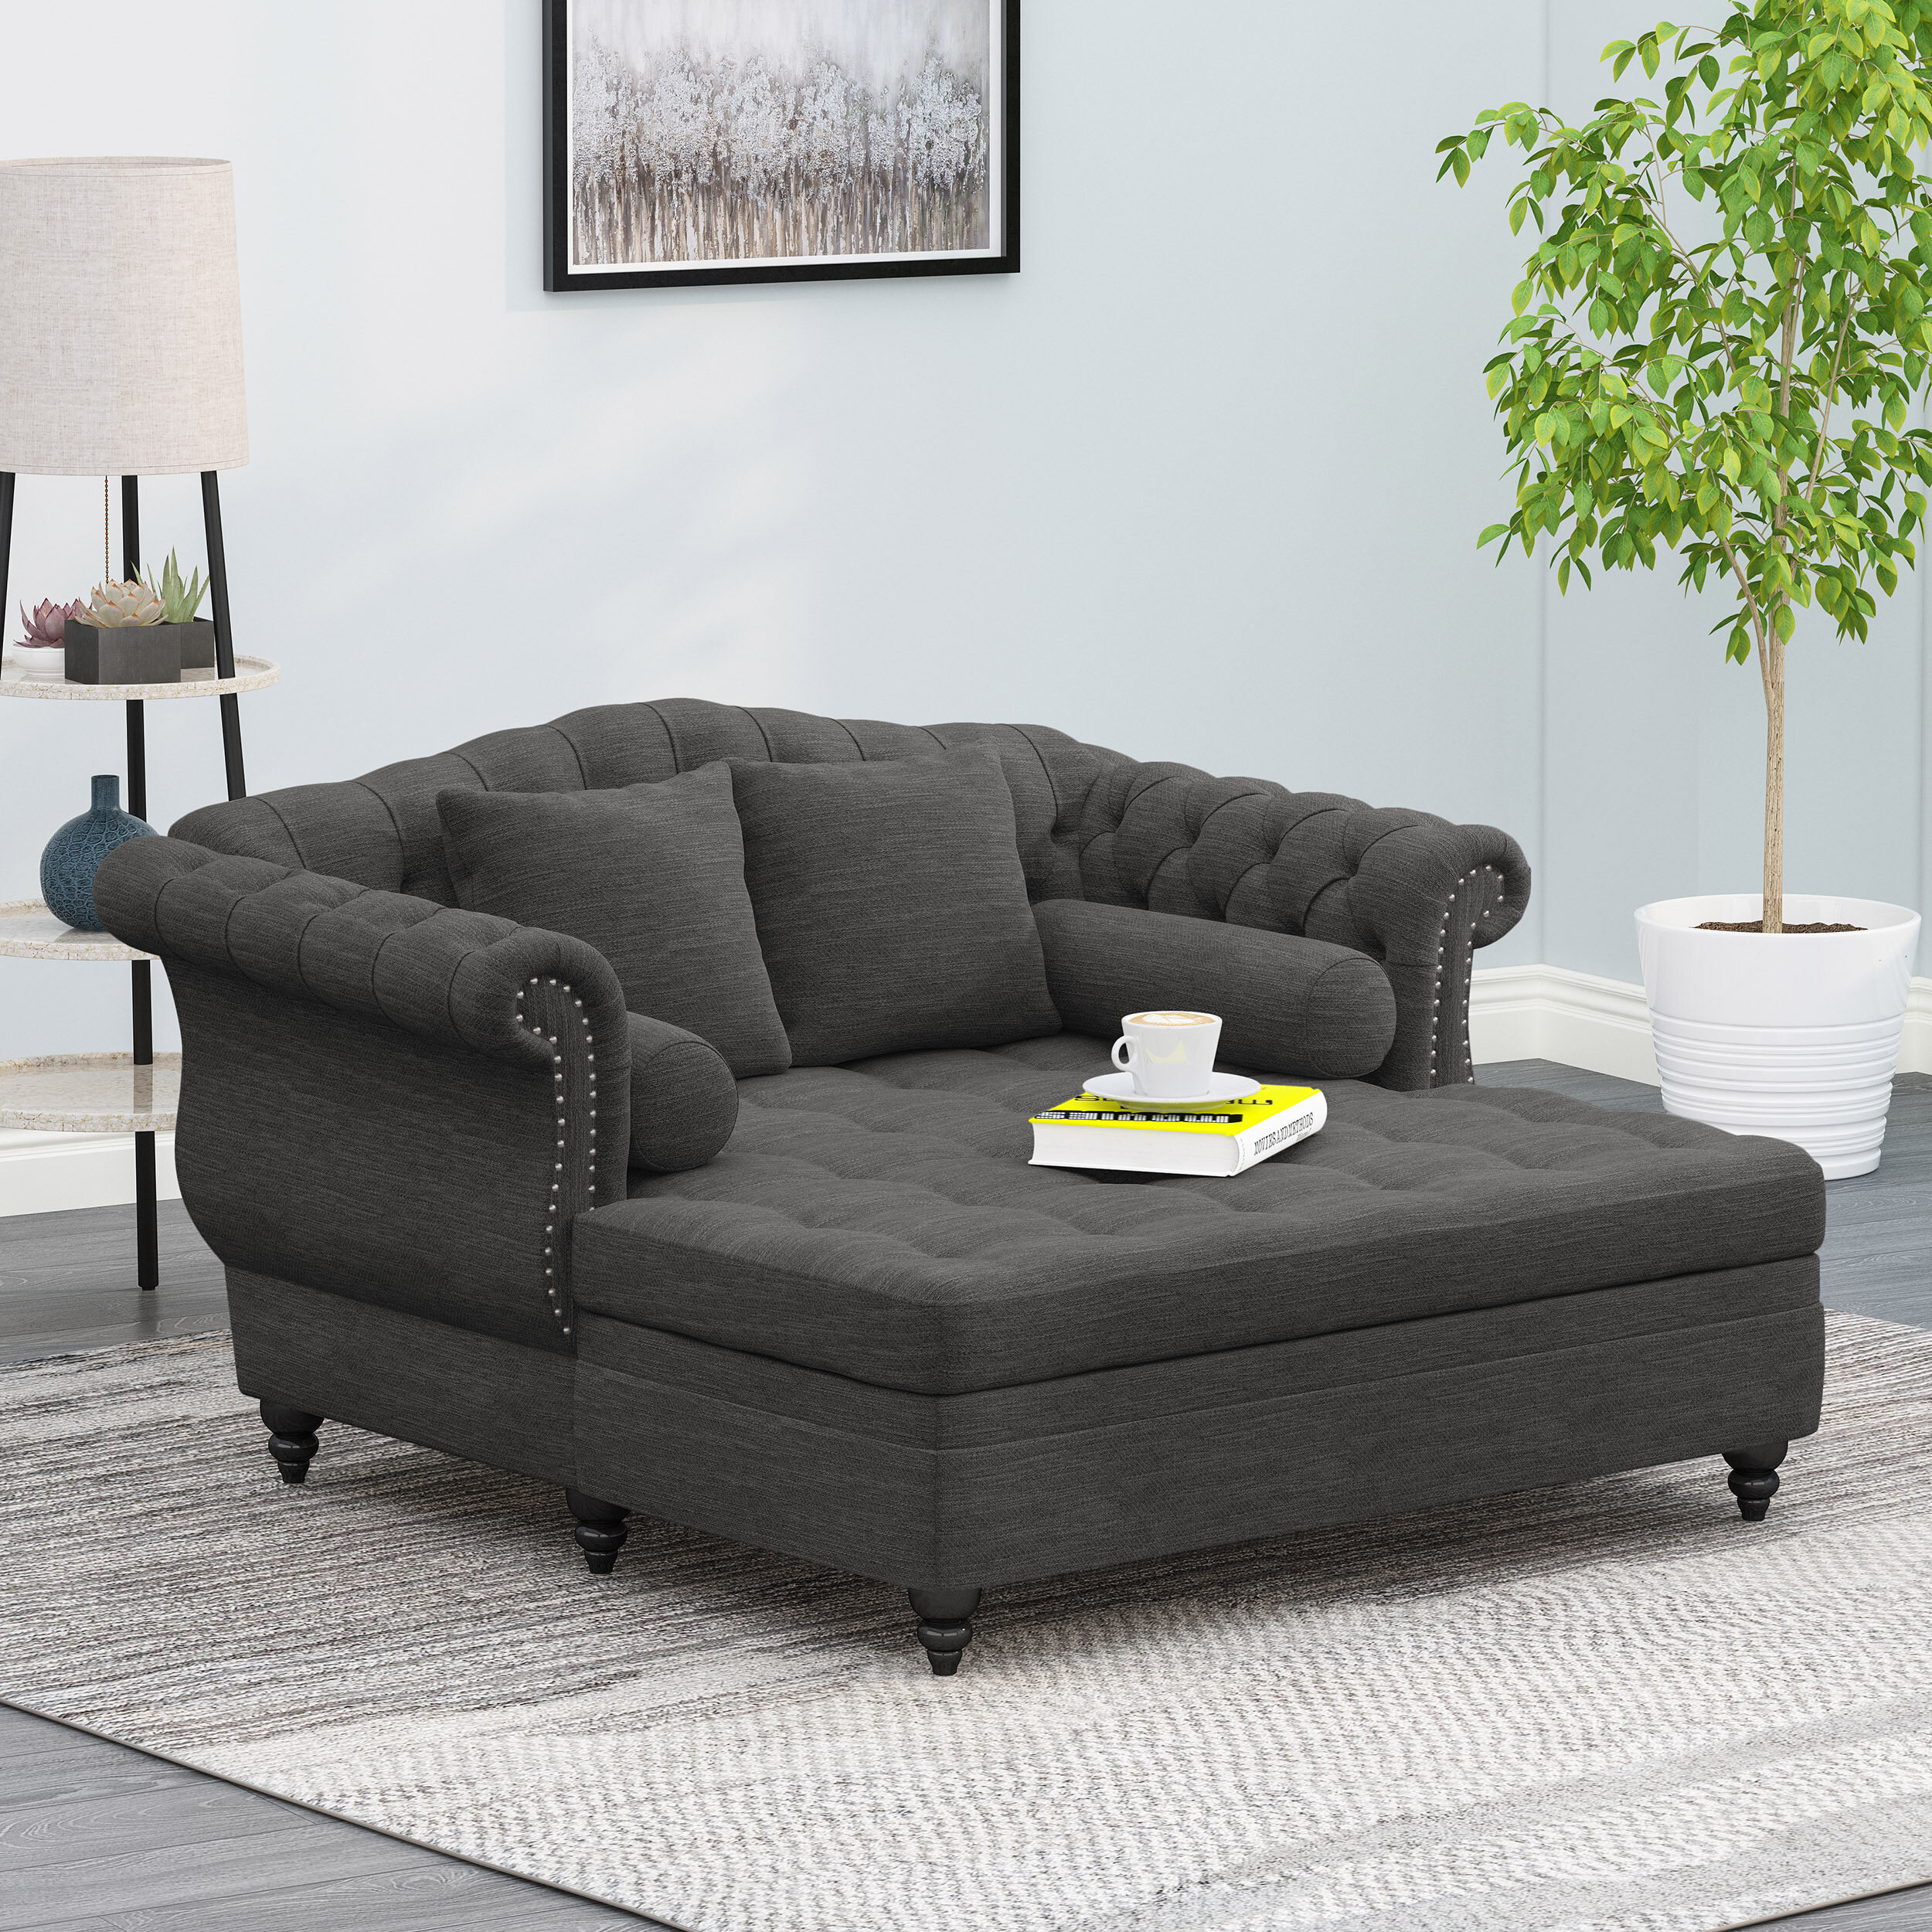 Lamm Upholstered Chaise Lounge